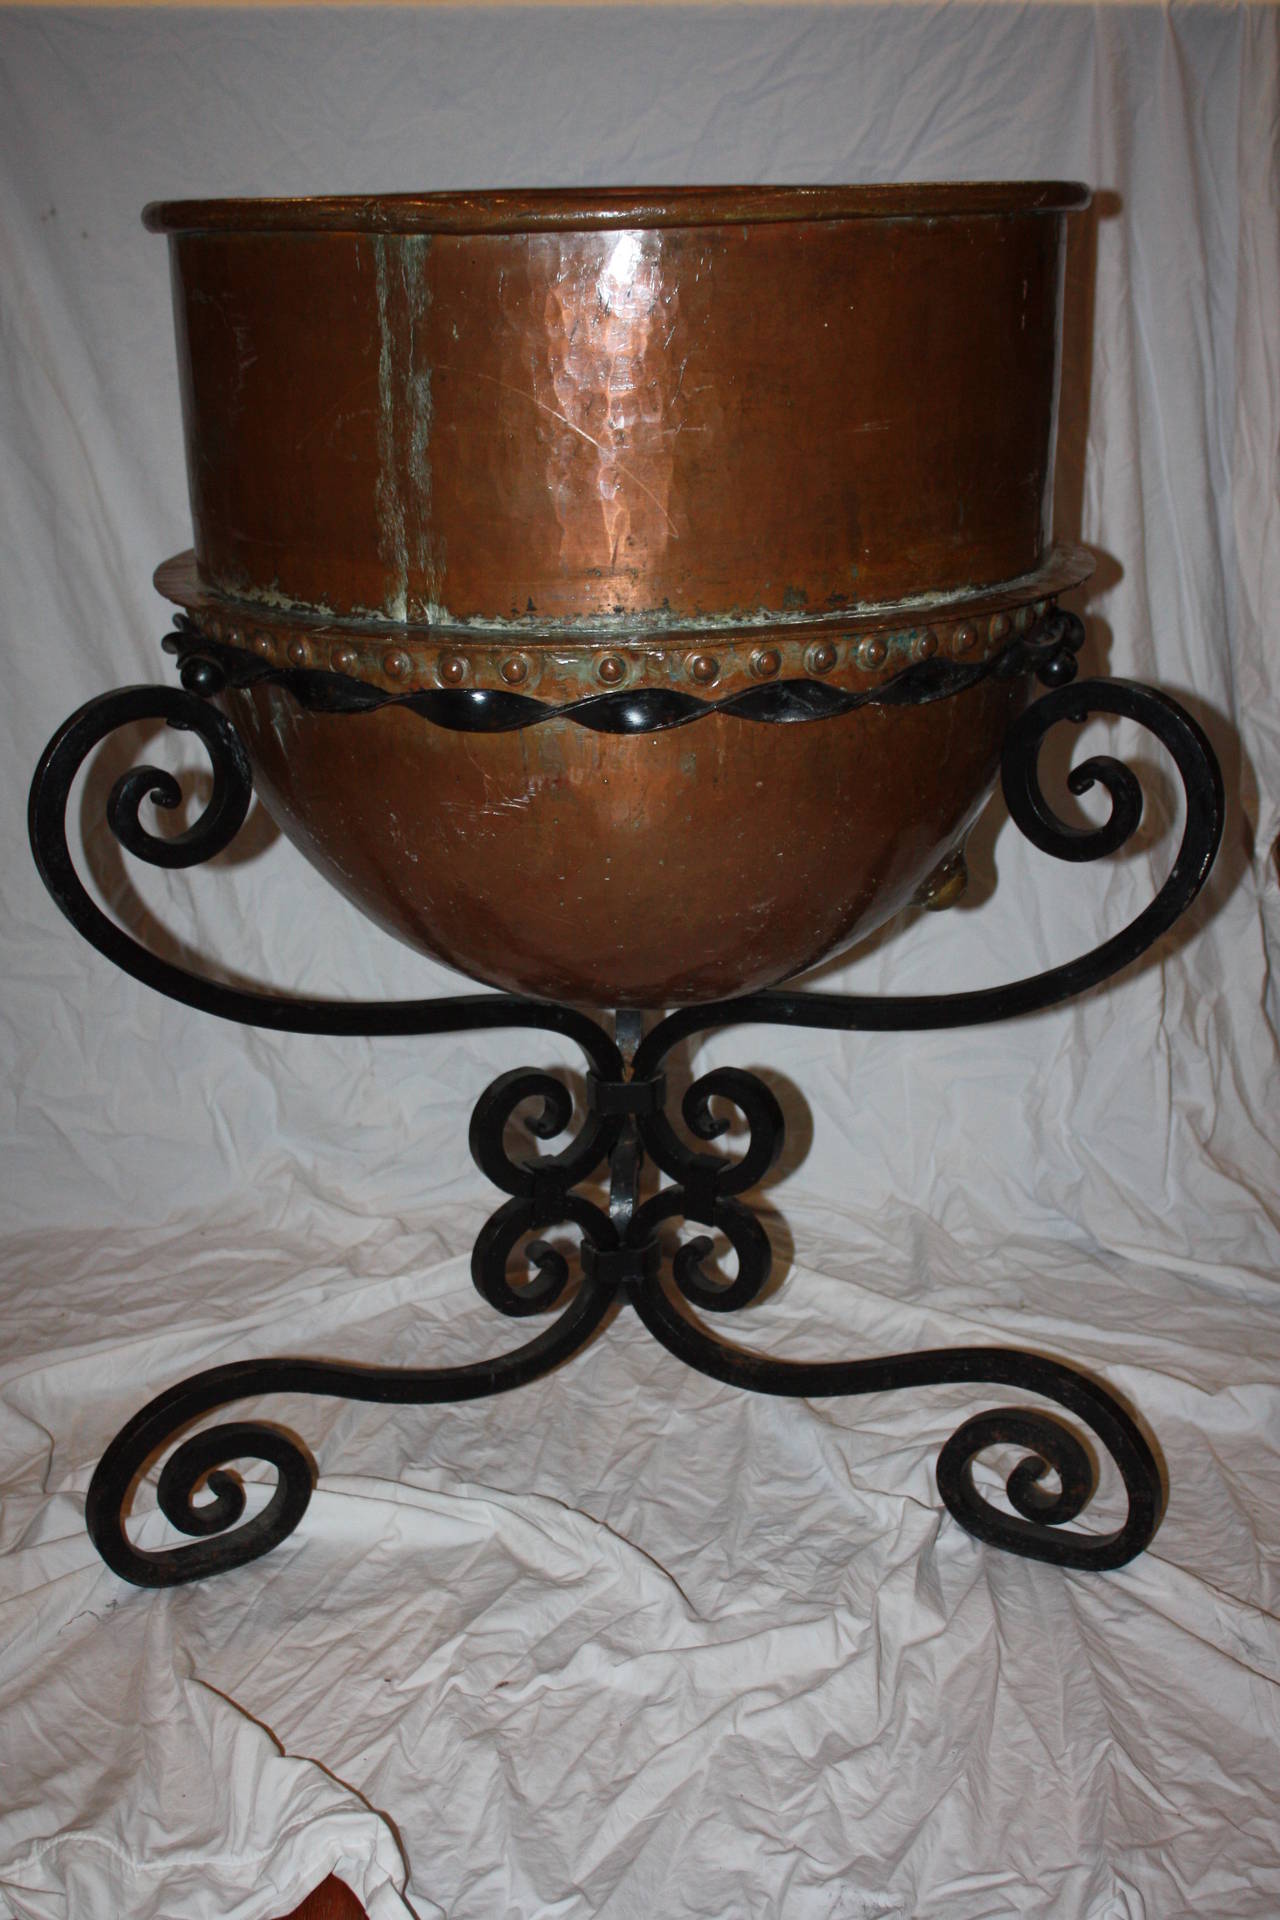 This is a very large copper pot on stand I purchased in France.  It would make a great log or kindling holder next to a fireplace. It would also make a very nice planter.  It is pierced by a hole that is part of the original design.  The wrought